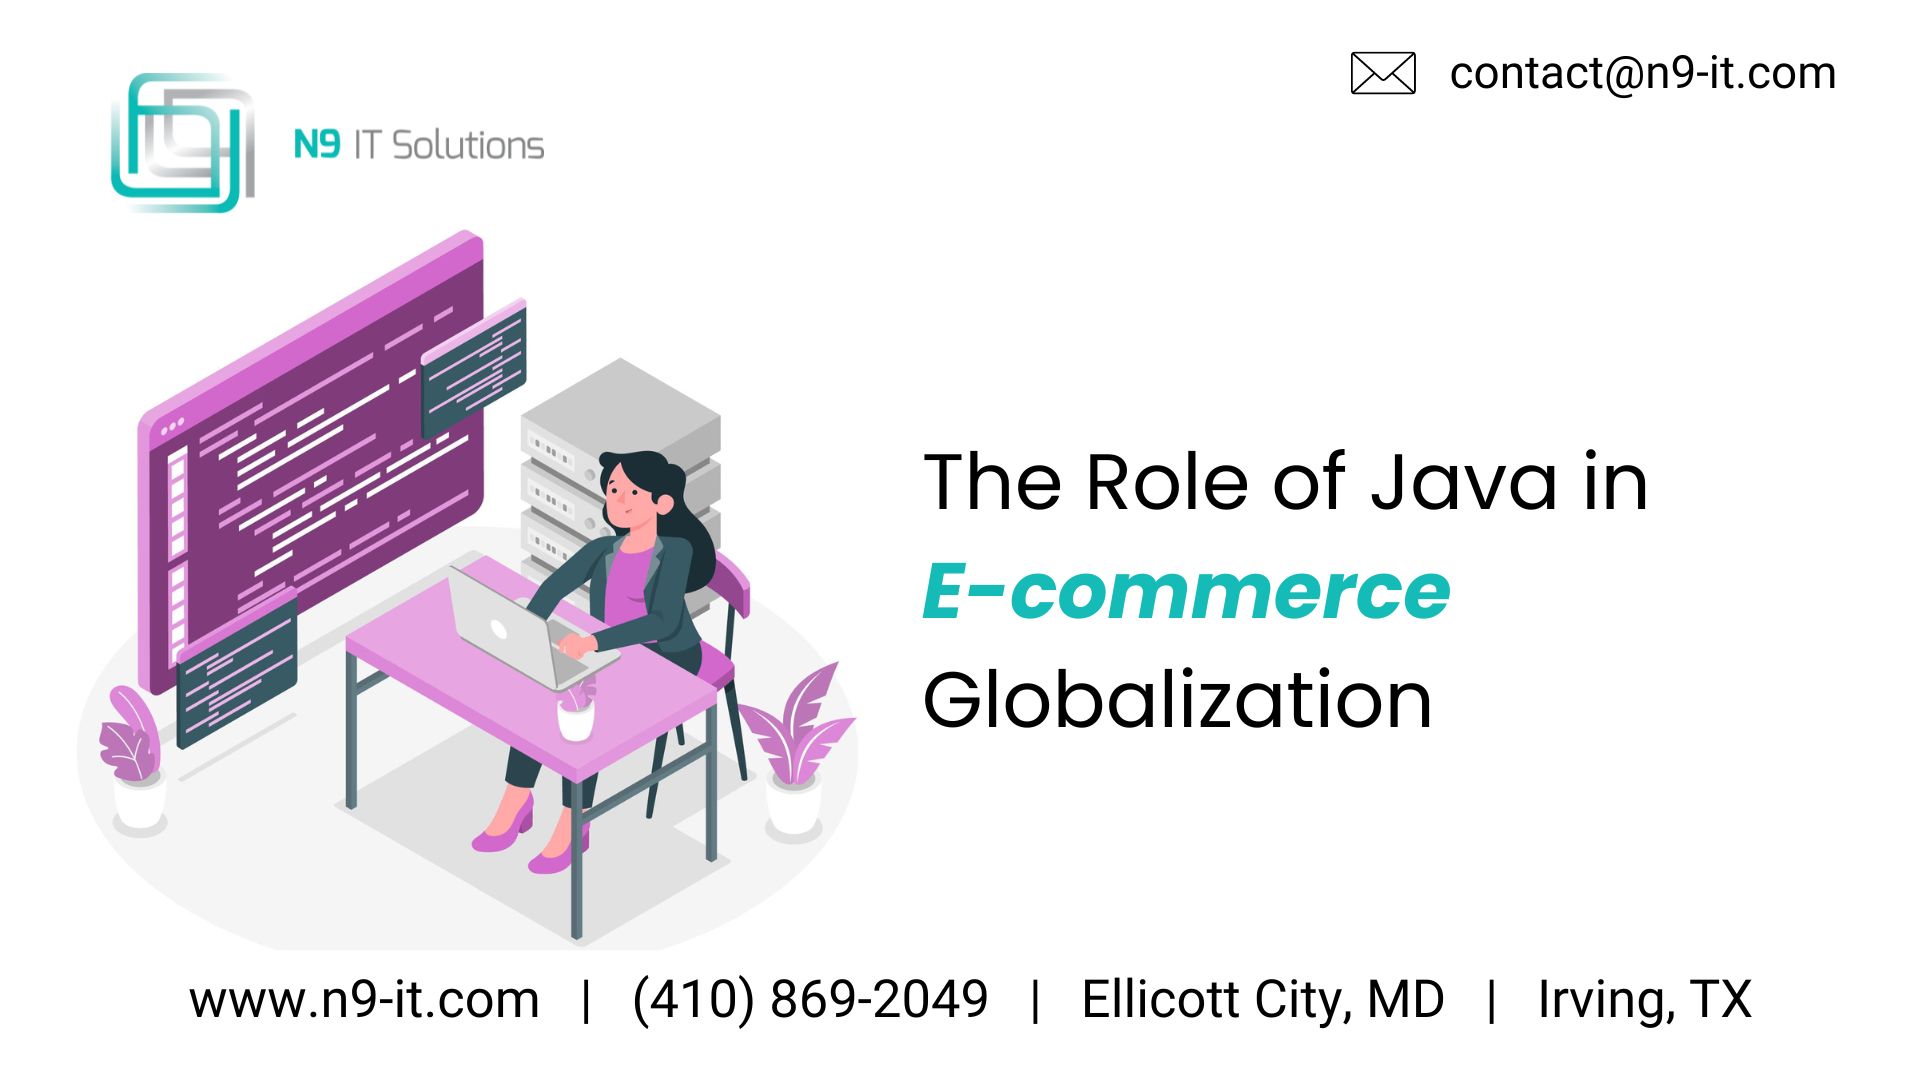 The Role of Java in E-commerce Globalization